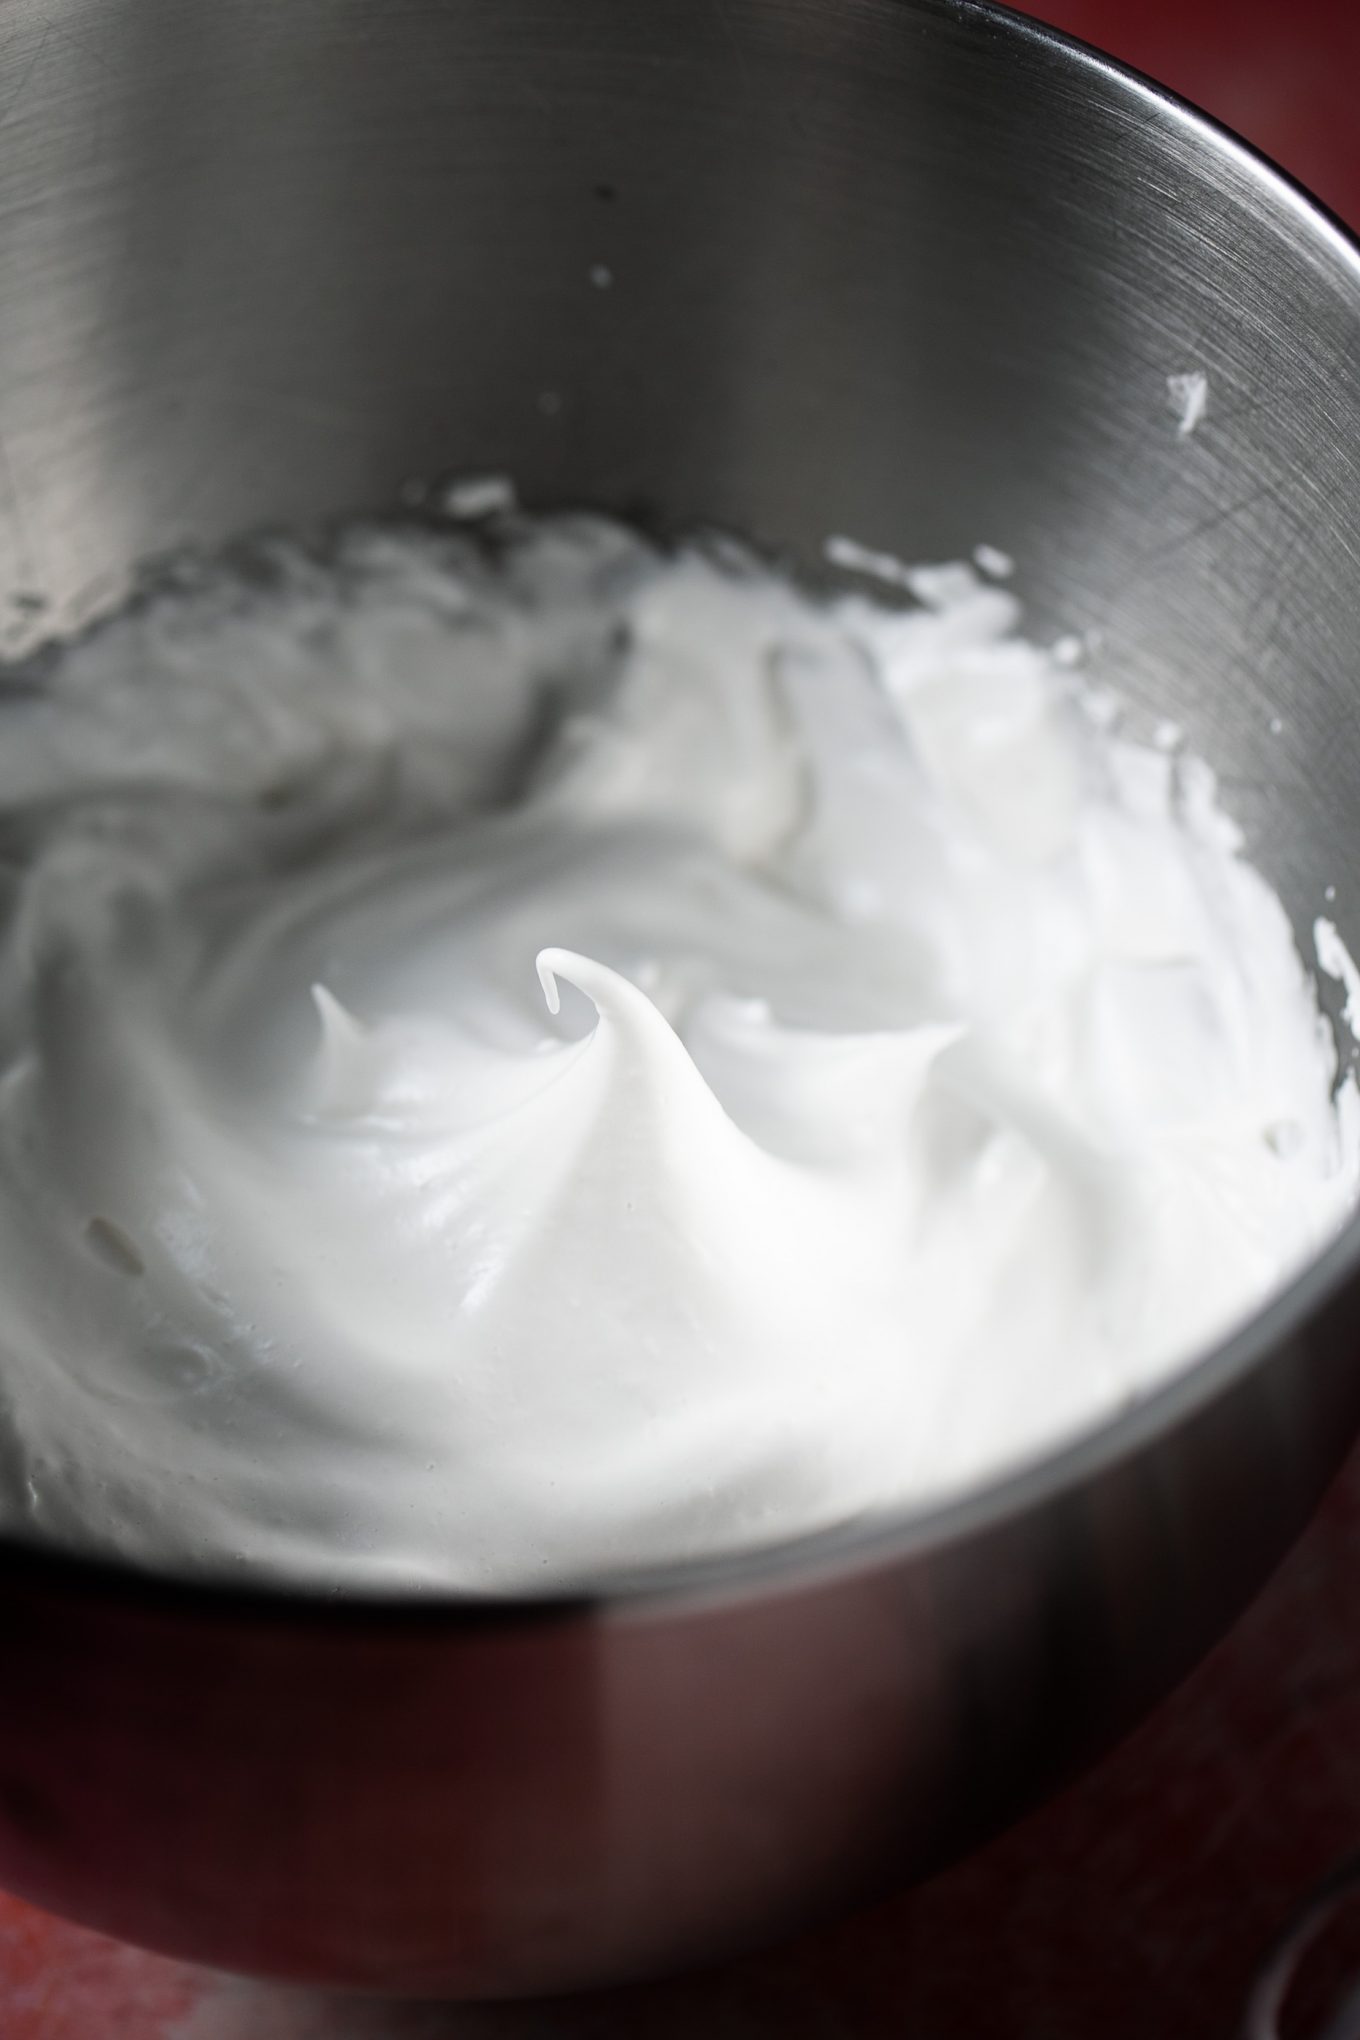 whipped aquafaba in the mixer bowl